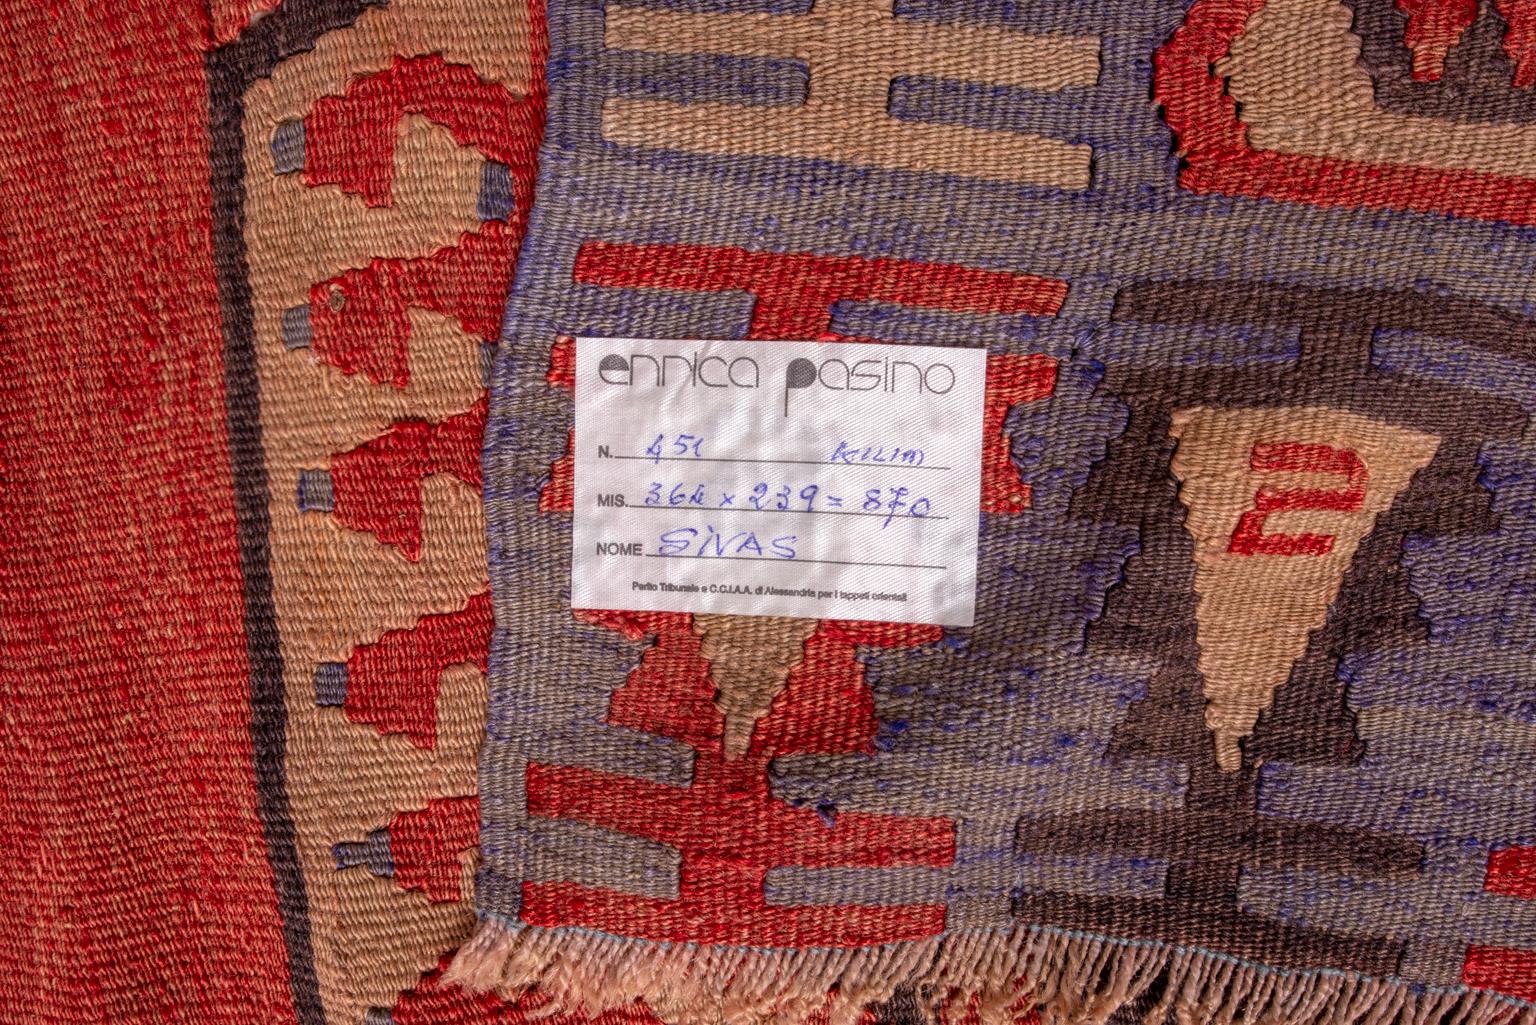 nr. 451 - Large and old kilim rug from Sivas province in Eastern Turkey, with nice colors and patina.
One of the most decorative rugs. No modern carpet can ever match it !
Old carpets are not affected by fashions. After one year the new modern